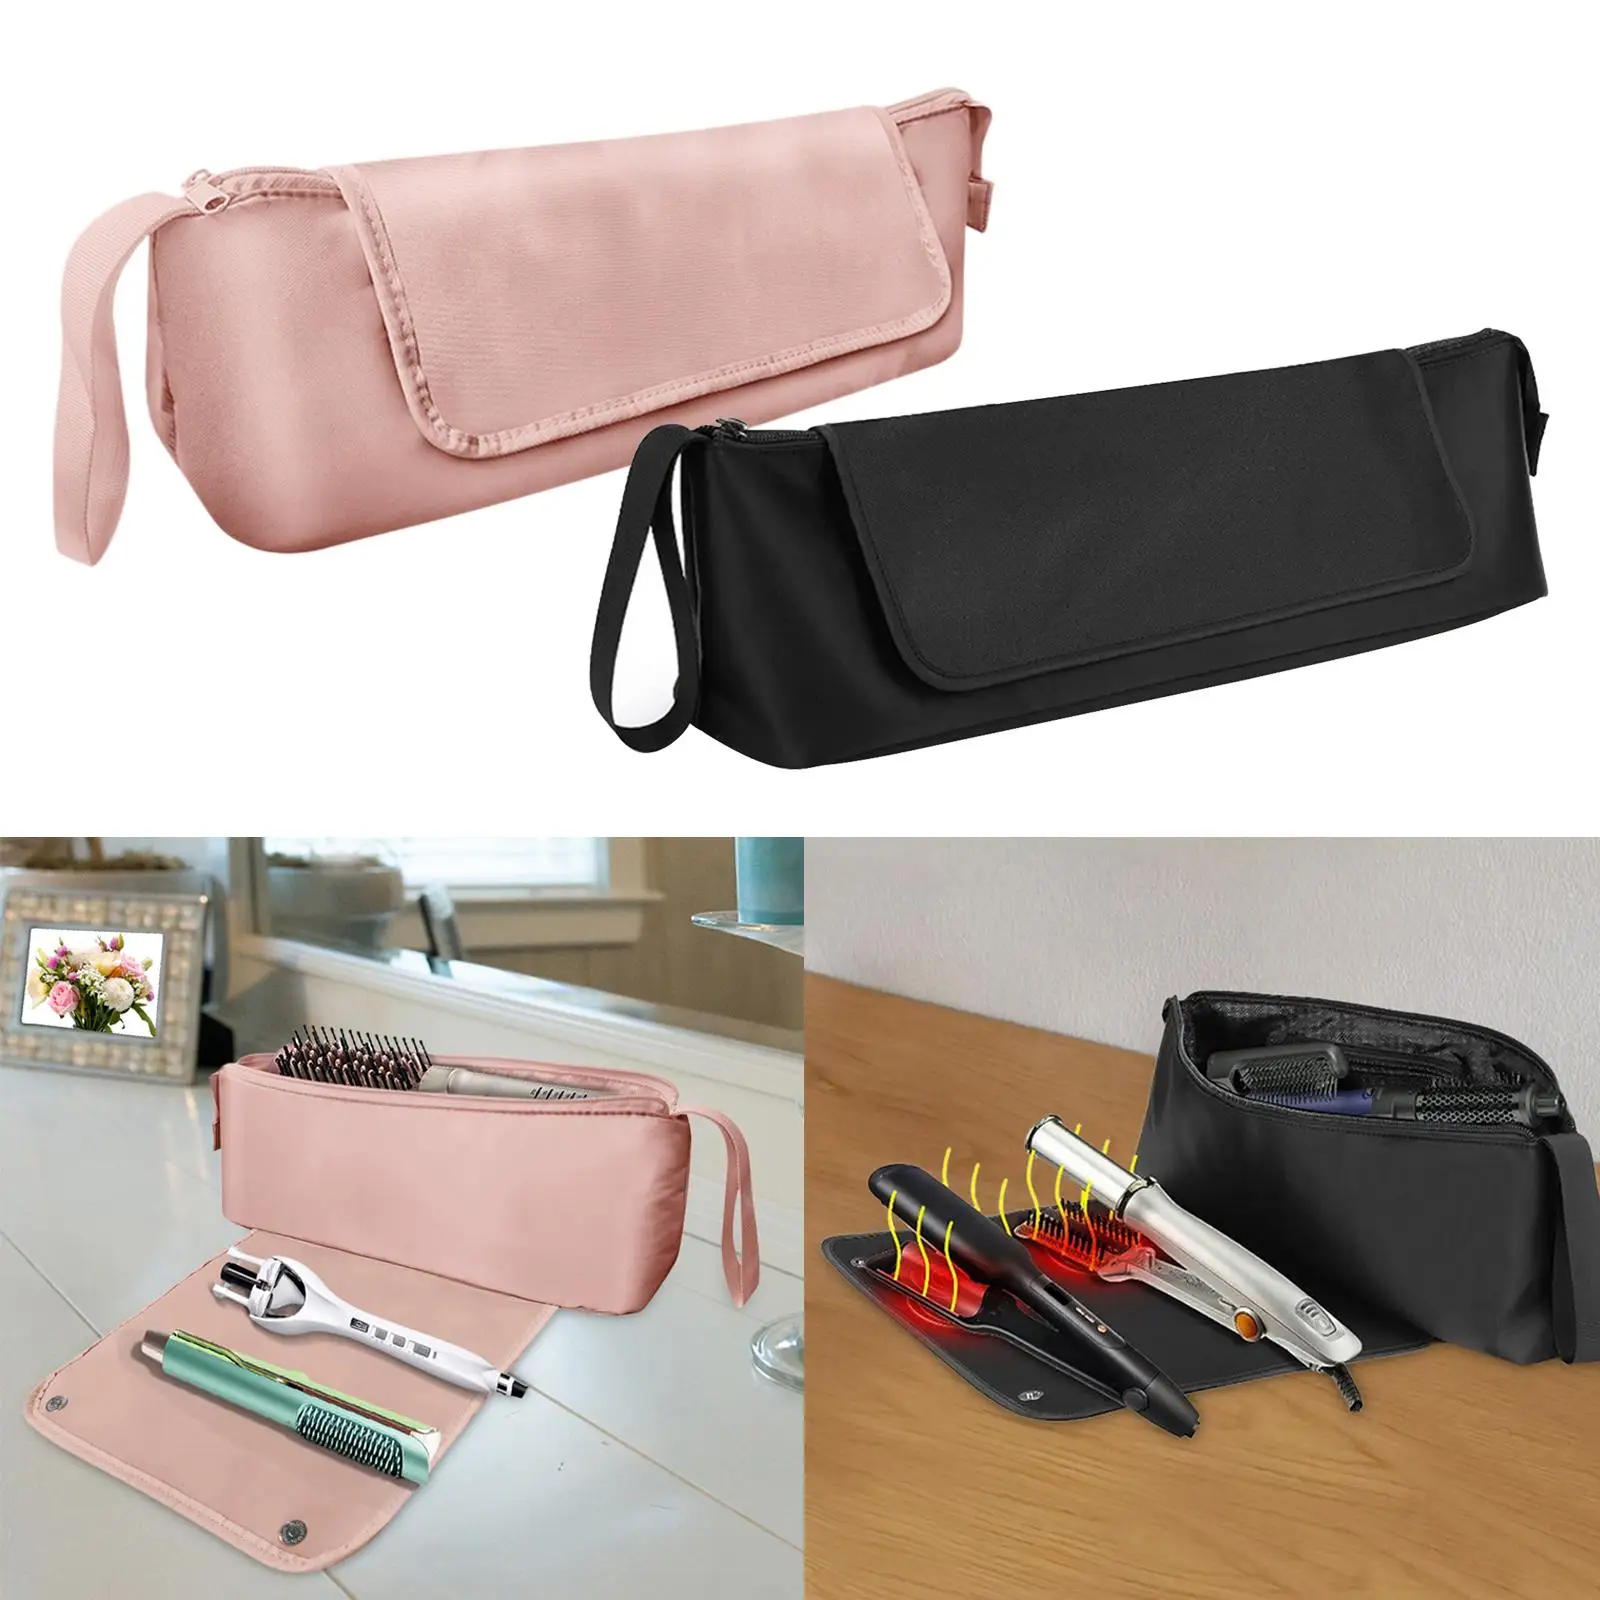 Hair Tool Travel Bag Hair Styling Accessory Organizer for Curling Iron Styling Irons Hair Styling Tools Travel Woman Gift